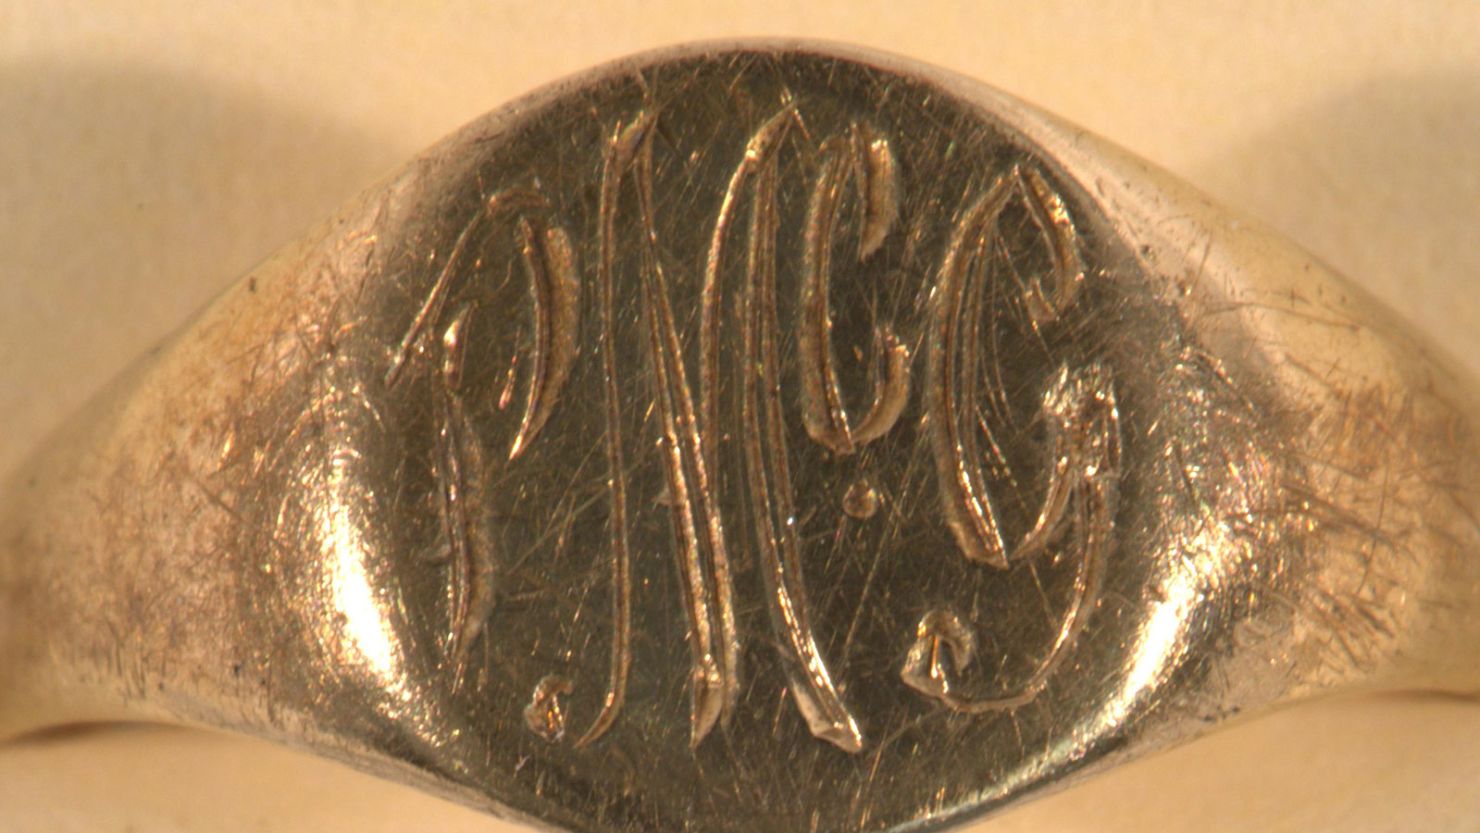 Construction workers found this monogrammed ring buried with the victim’s remains in February 2003.